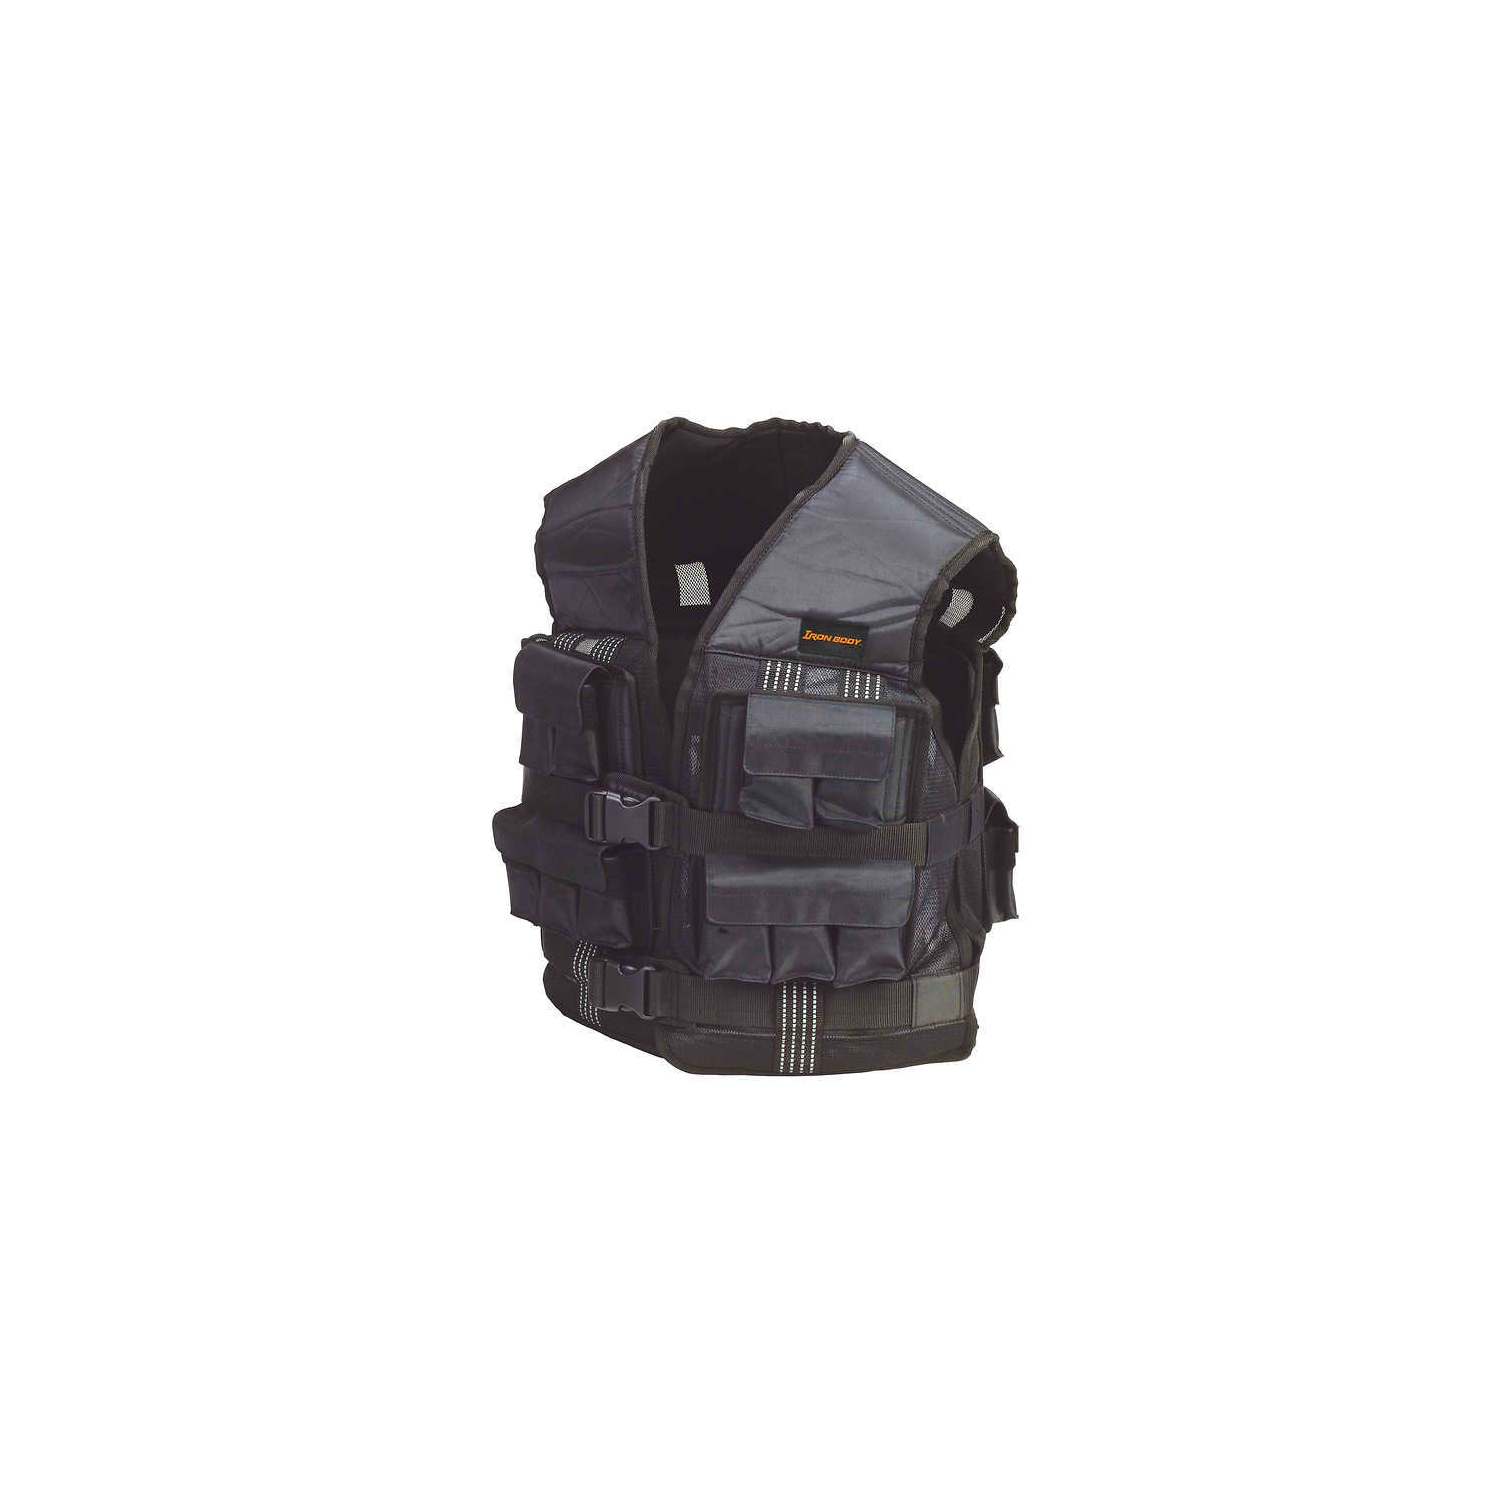 Iron Body Fitness 19 kg Weighted Vest